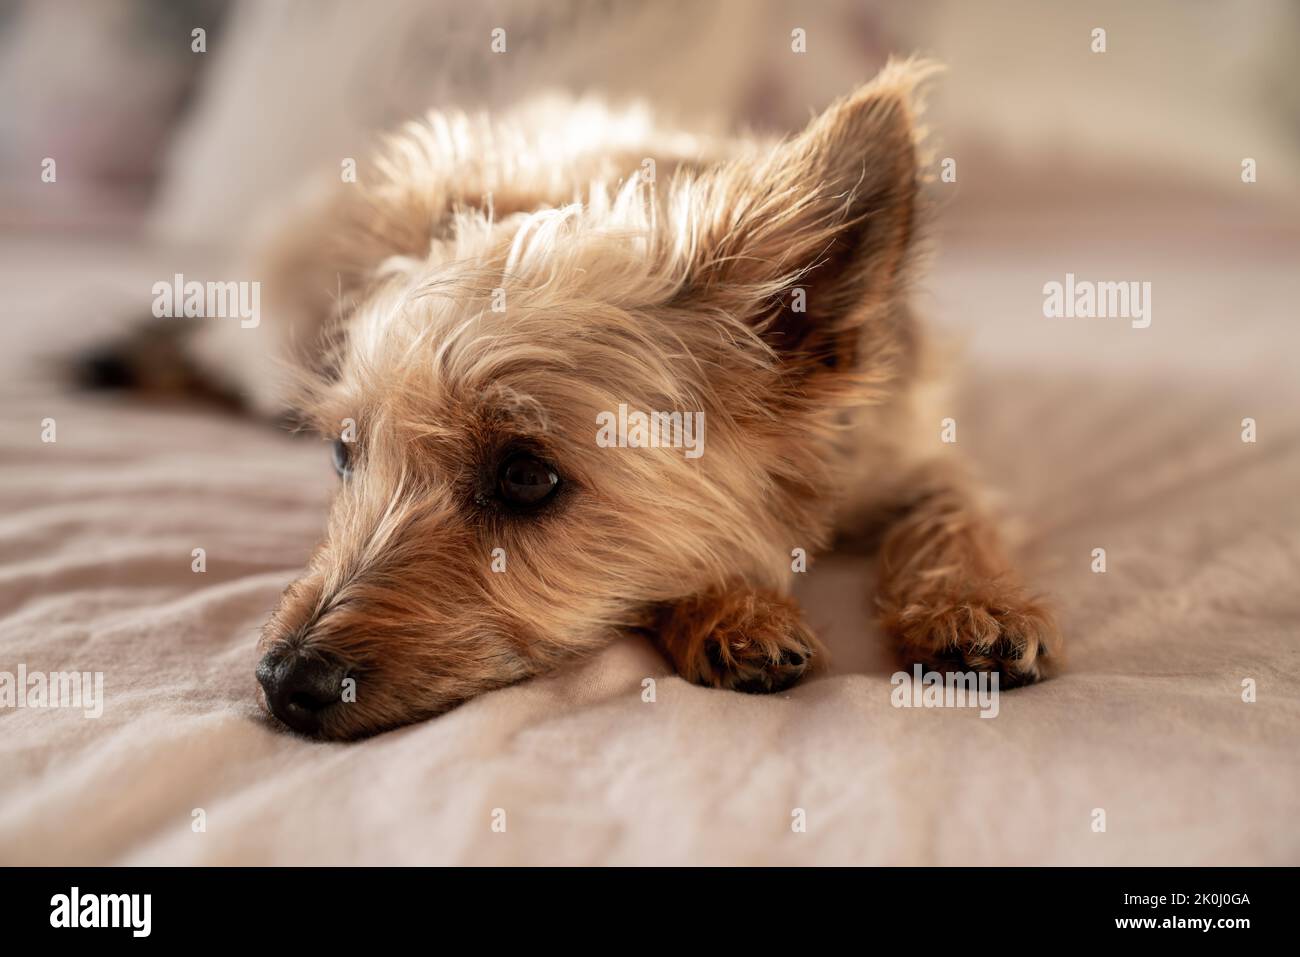 Cute small dog relaxes in sunlight on a bed. Closeup Stock Photo